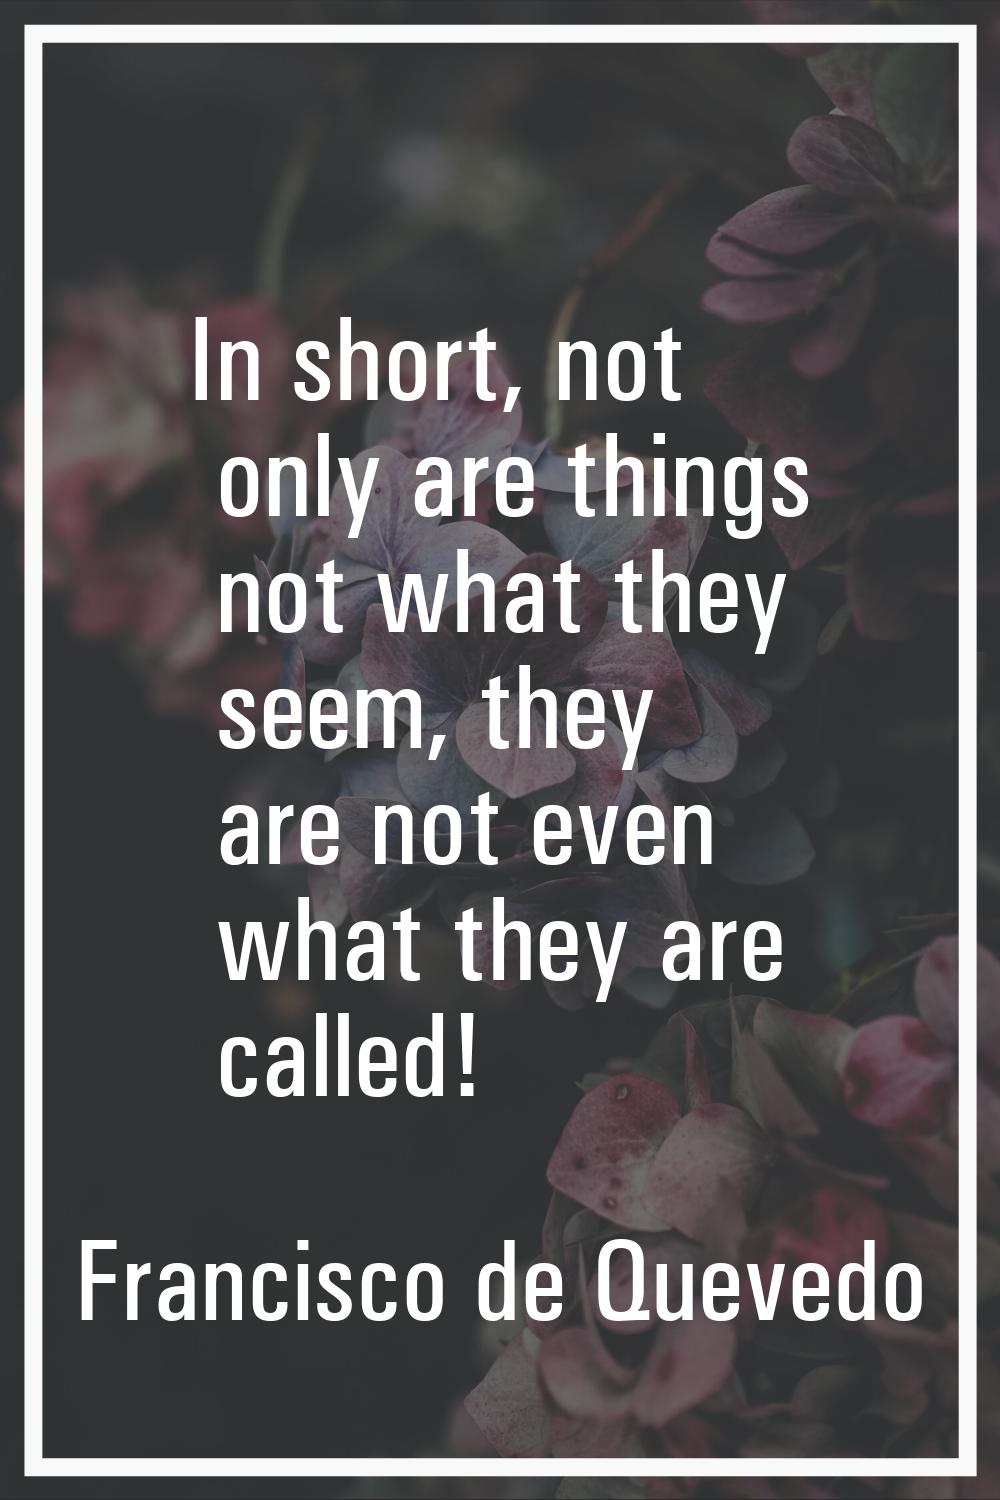 In short, not only are things not what they seem, they are not even what they are called!